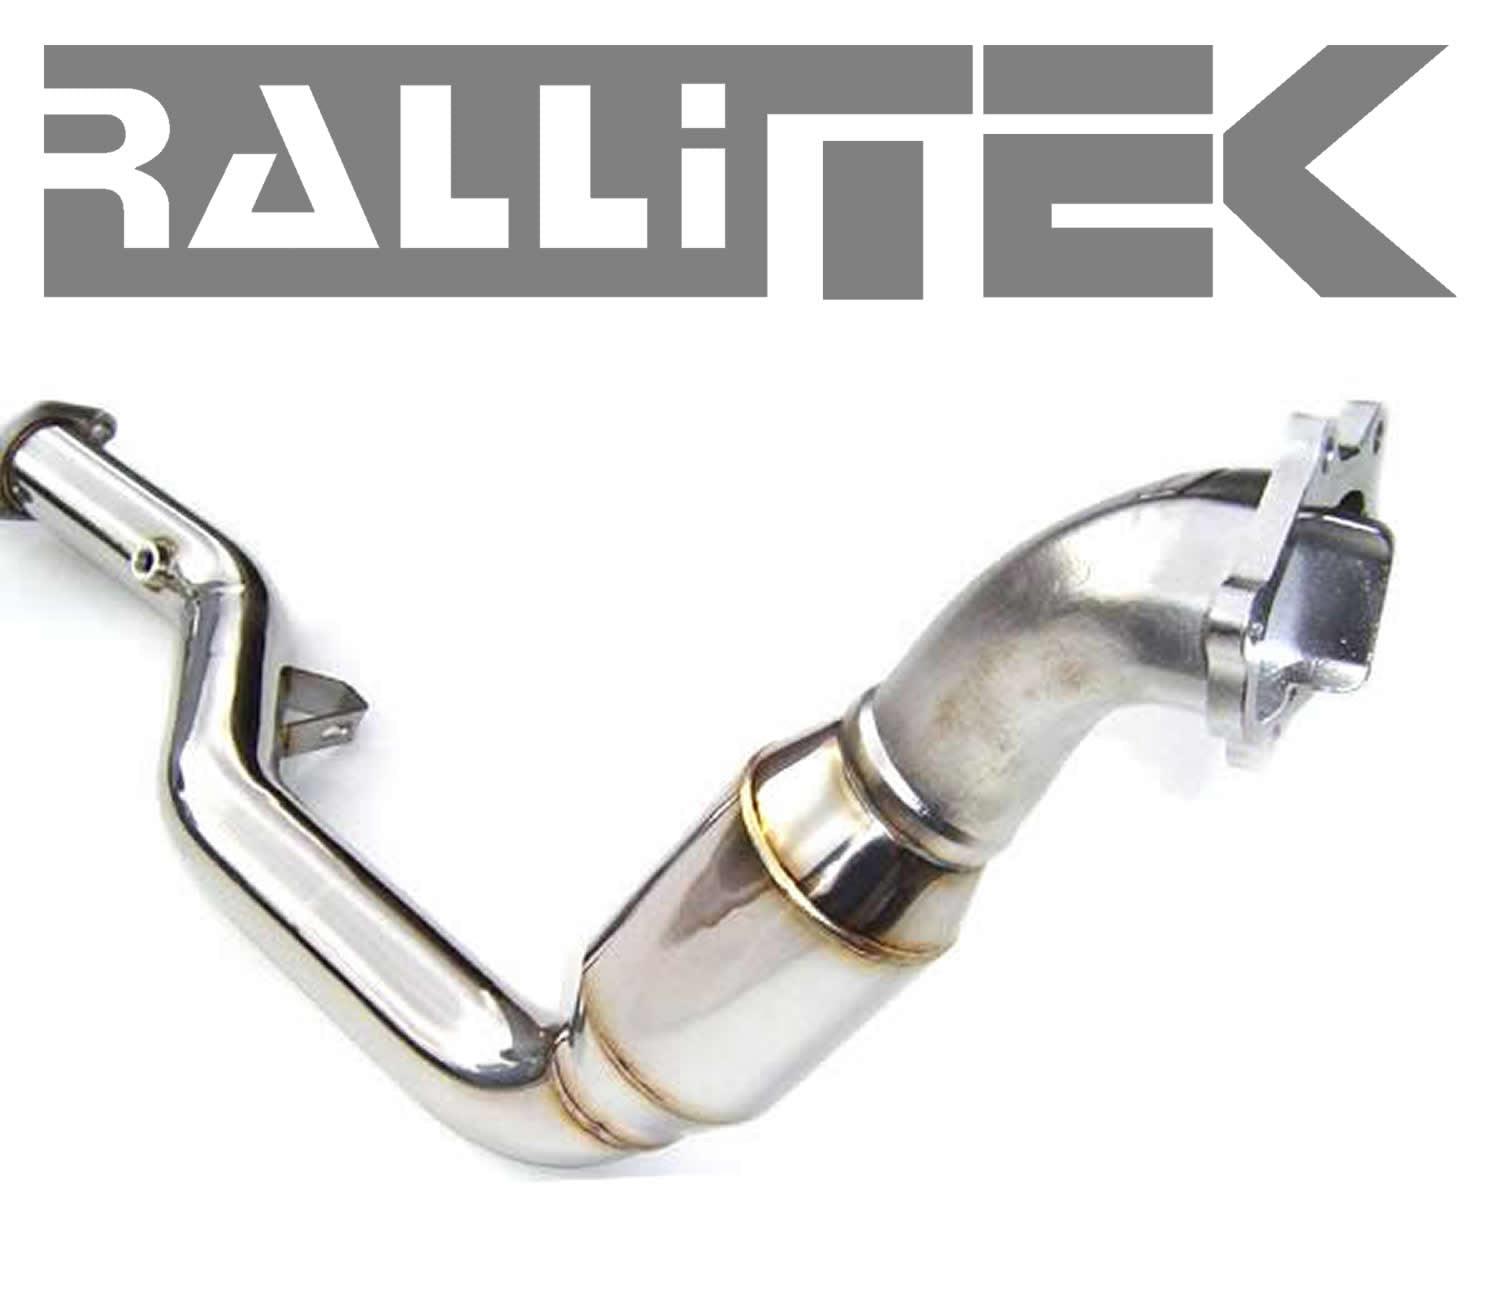 Invidia Catted Downpipe Divorced Wastegate - AT ONLY - Legacy GT & Outback XT 2005-2009